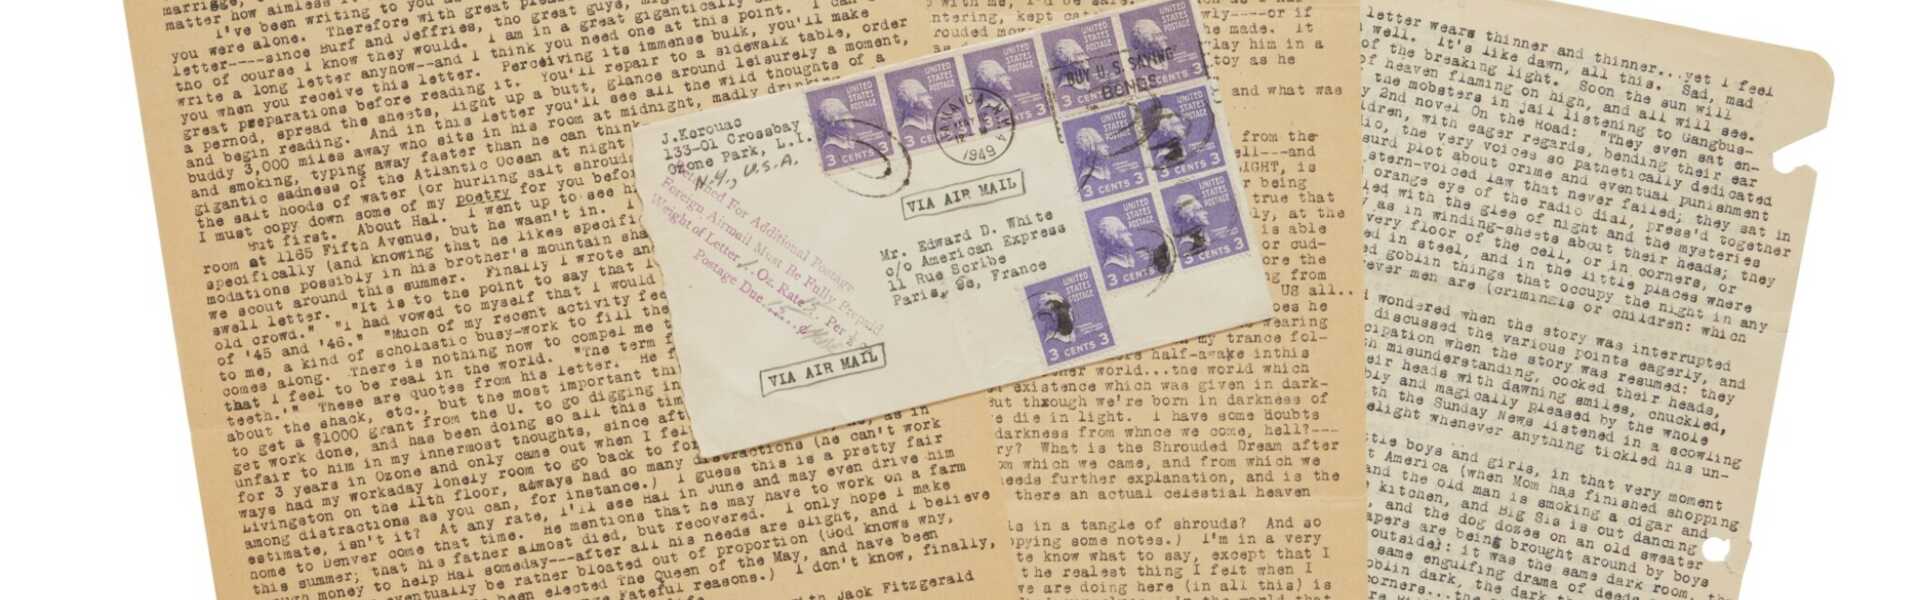 Kerouac, Jack | Typed letter signed to Ed White, with an an excerpt from On the Road